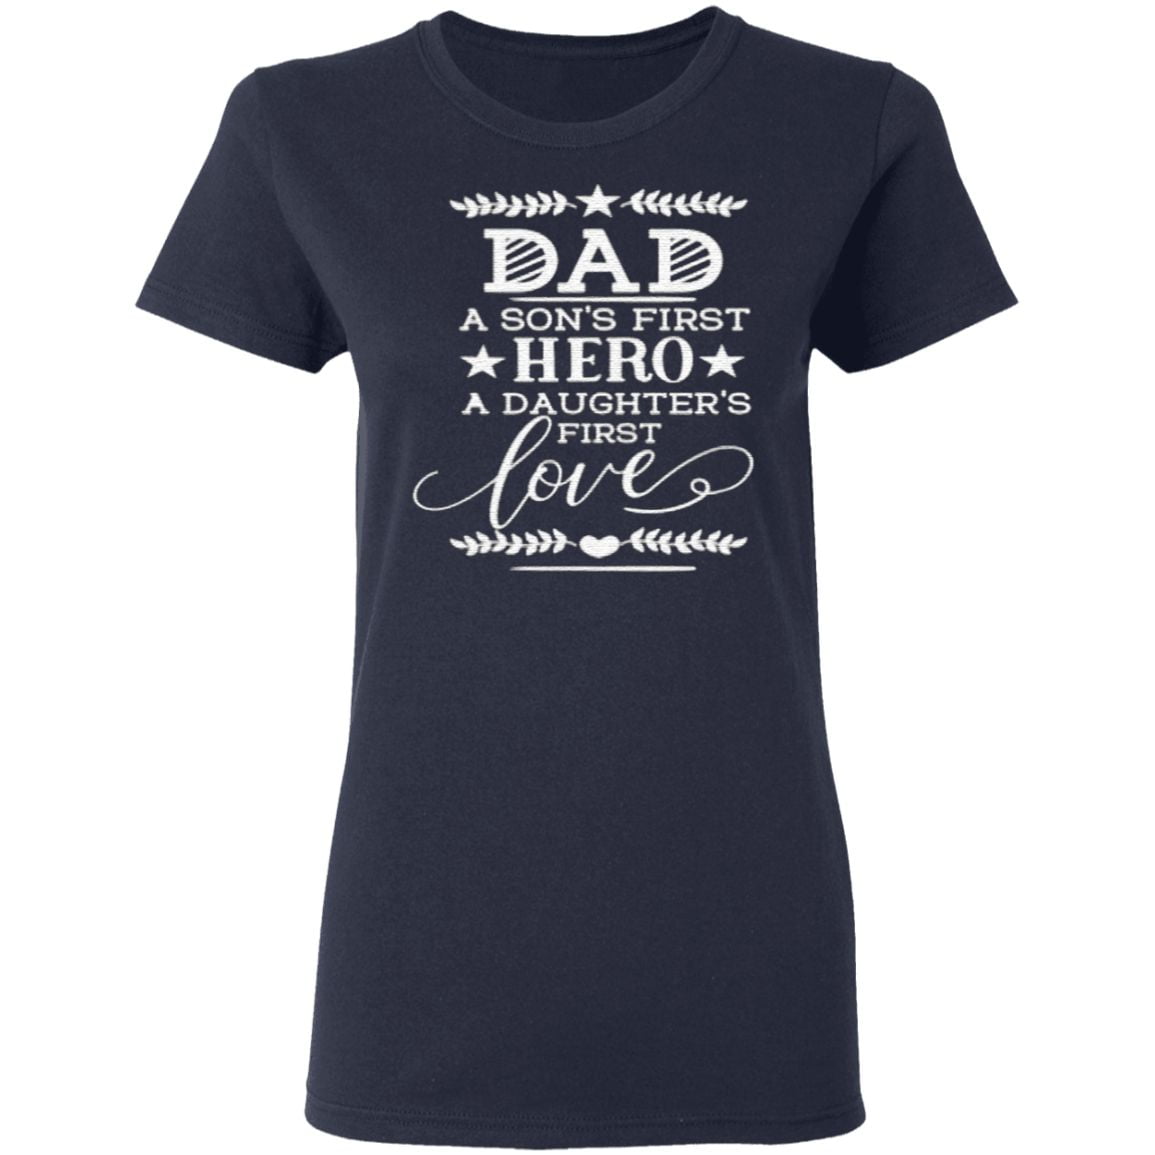 dad a son’s first hero a daughter’s first love classic T-Shirt